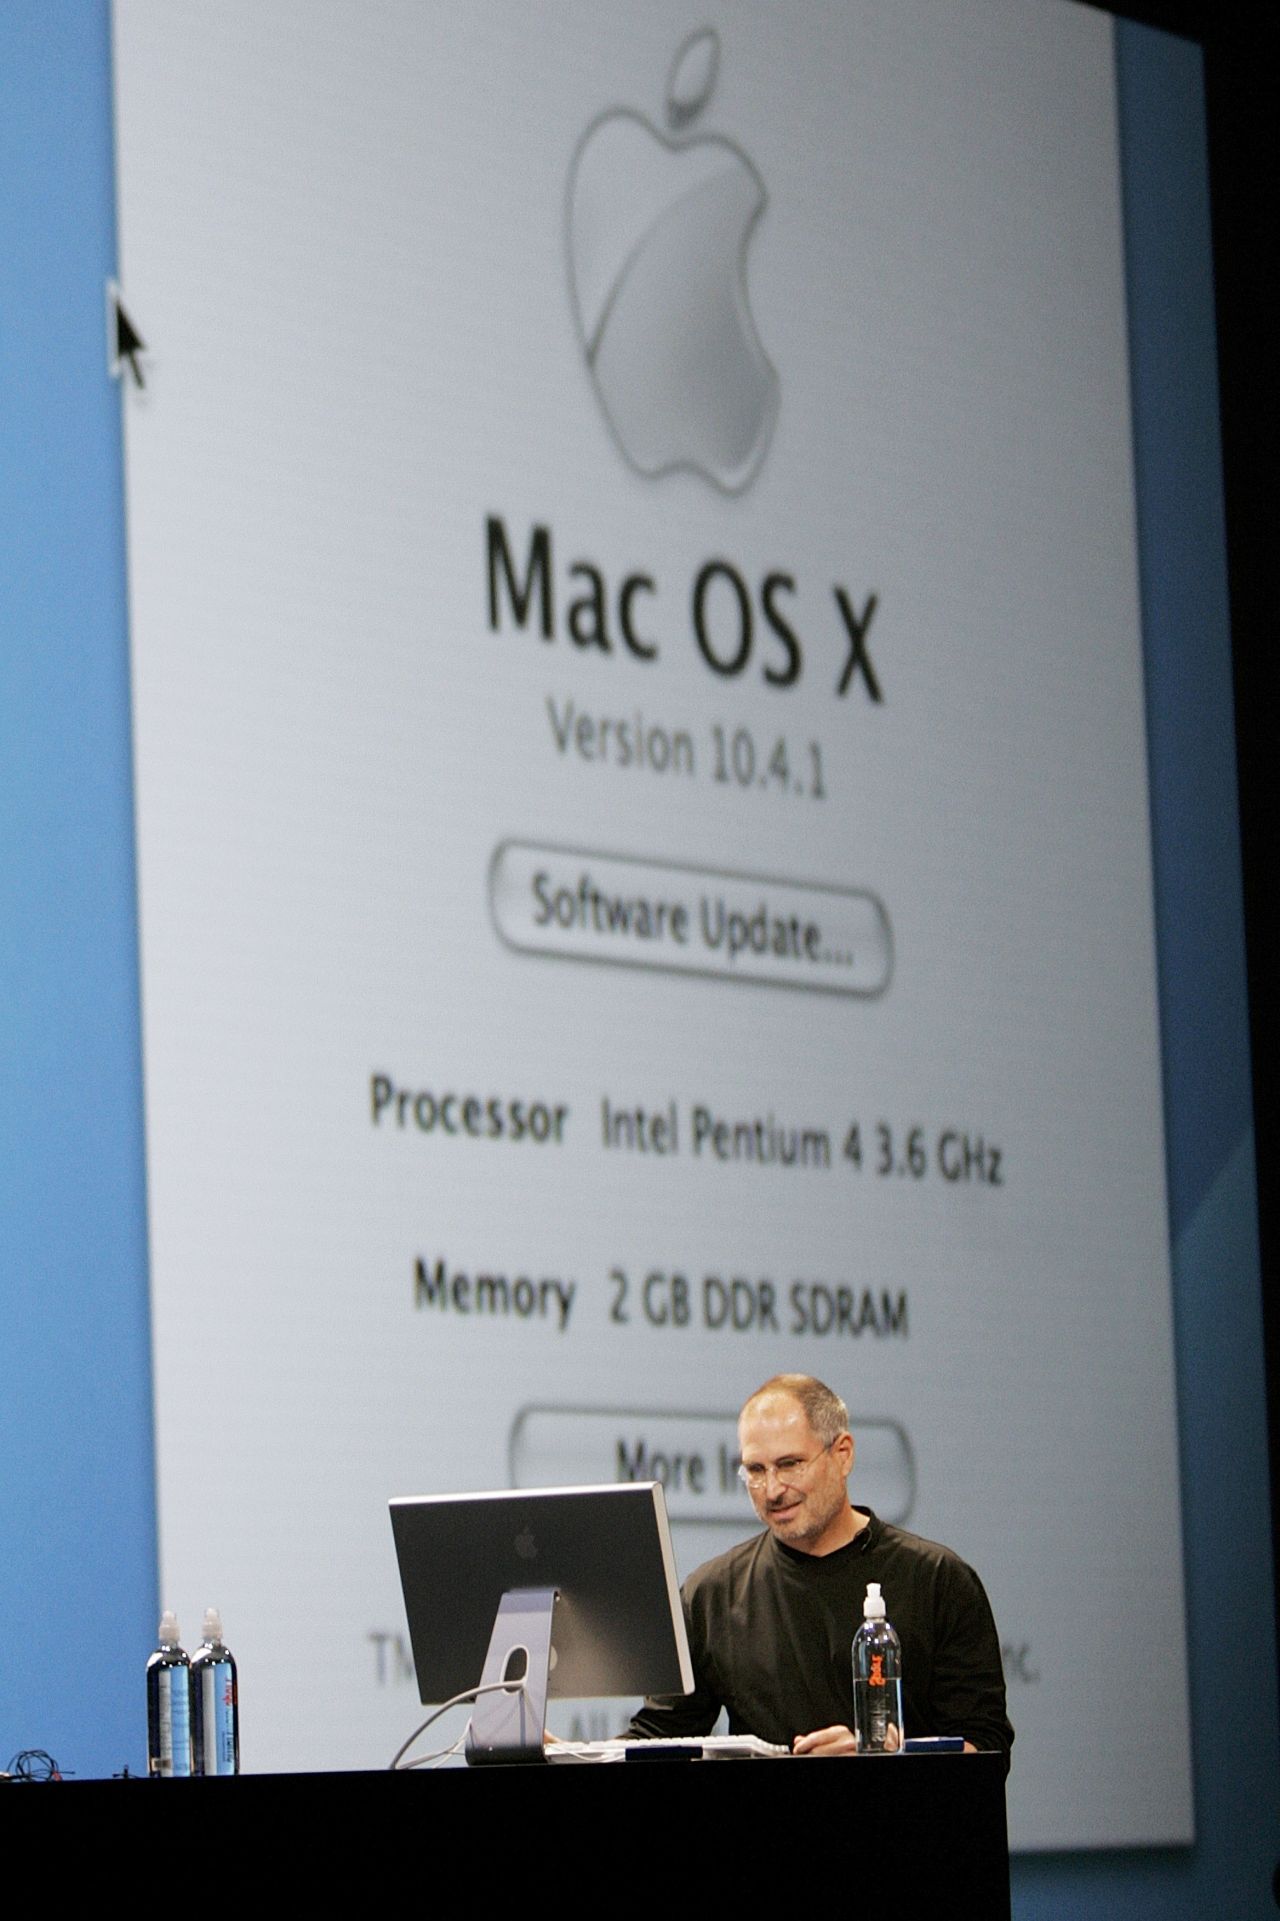 Jobs opened his 2005 WWDC keynote by using a computer with an Intel processor, representing Apple's switch from IBM to Intel for its processing chips. 